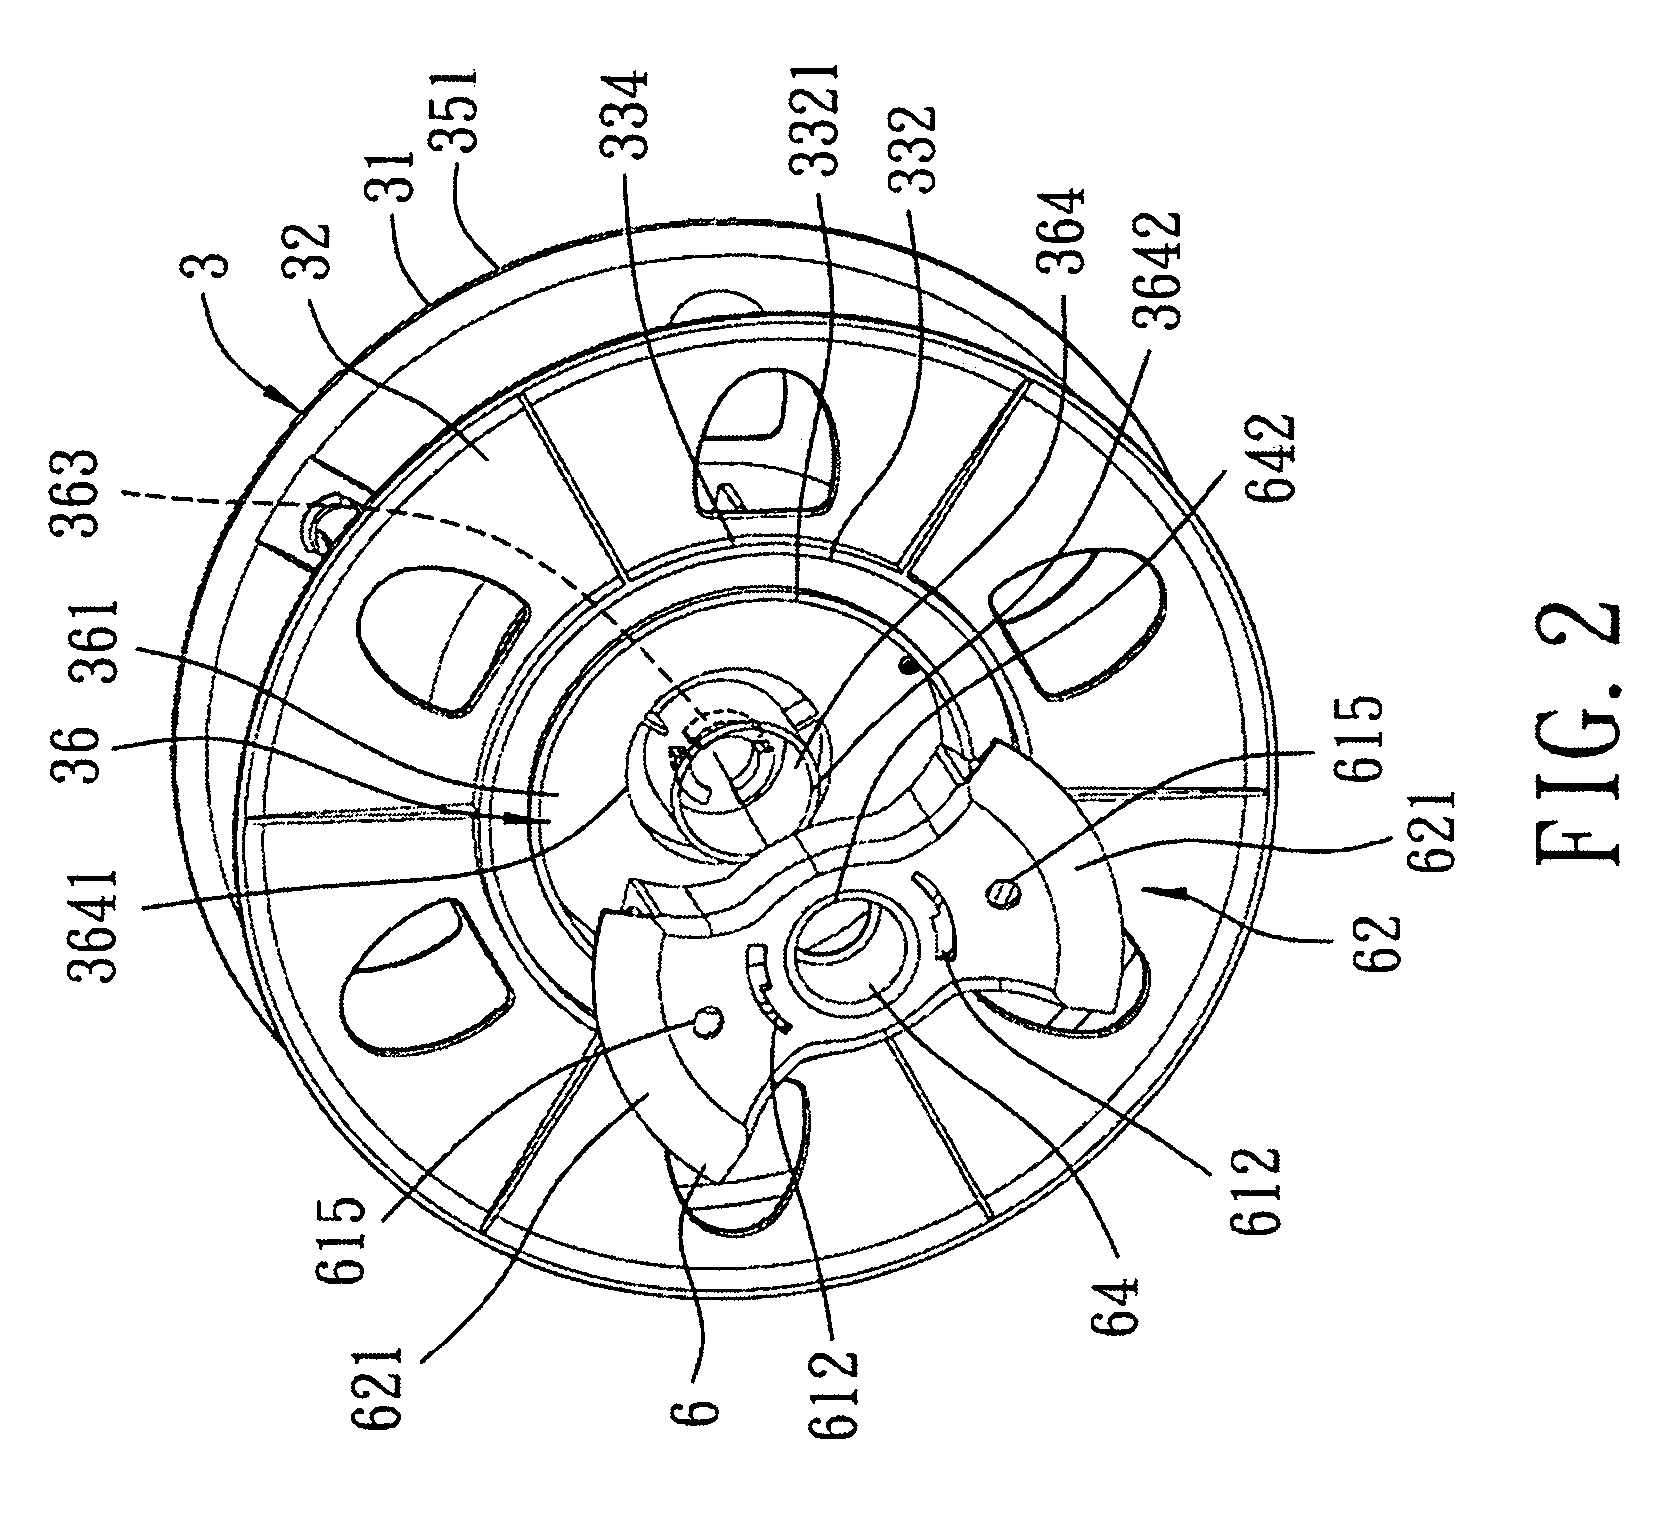 Reel device for winding an electrical cable thereon